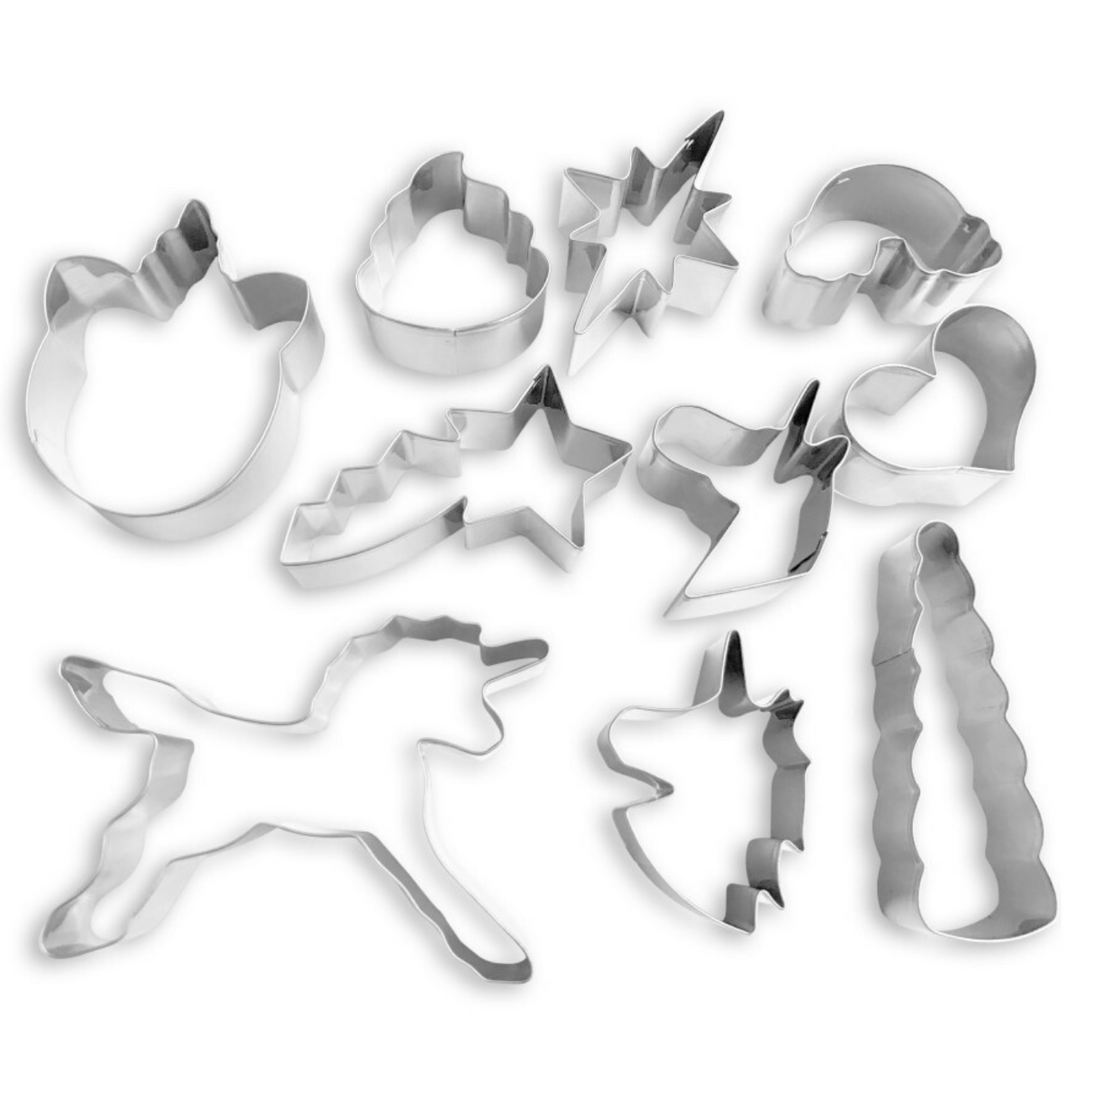 Out of box image of Stainless Steel Rainbow and Unicorn Cookie Cutters Includes: unicorn, shooting star, unicorn horn, star, rainbow, heart, unicorn poop and assorted unicorn head stainless steel cookie cutters.